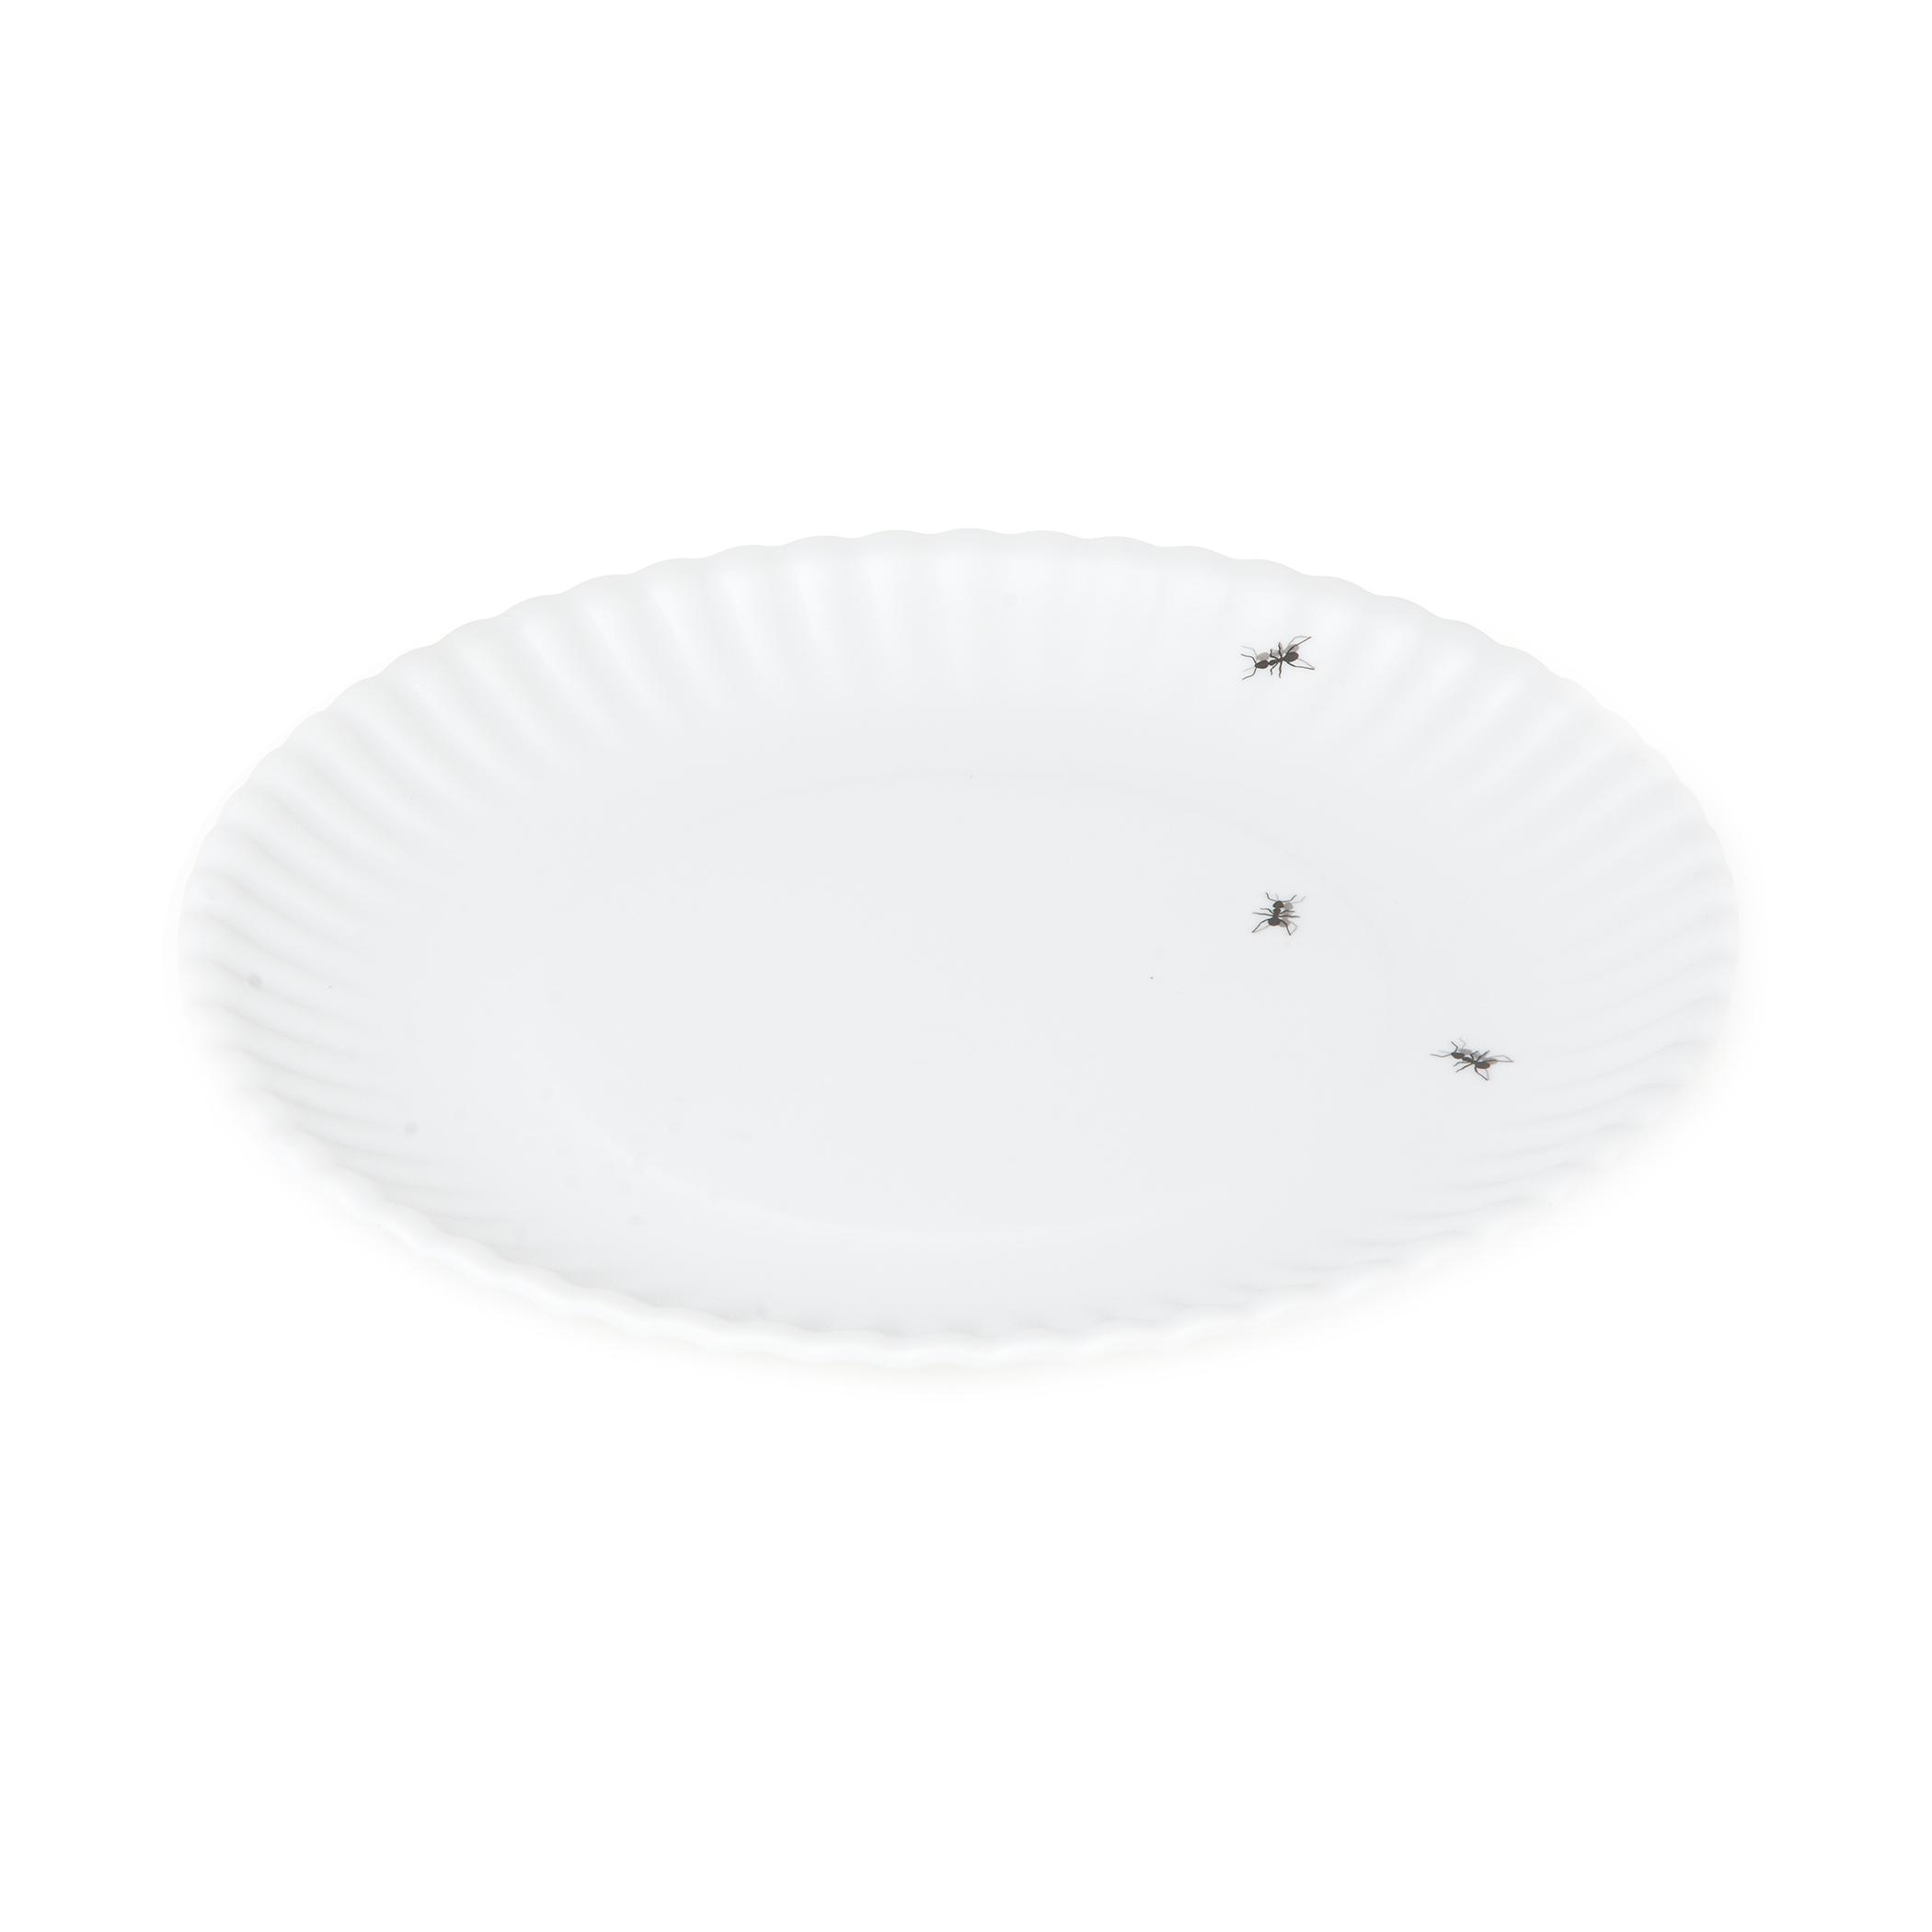  Ants Melamine Paper Plate - 9 Inch